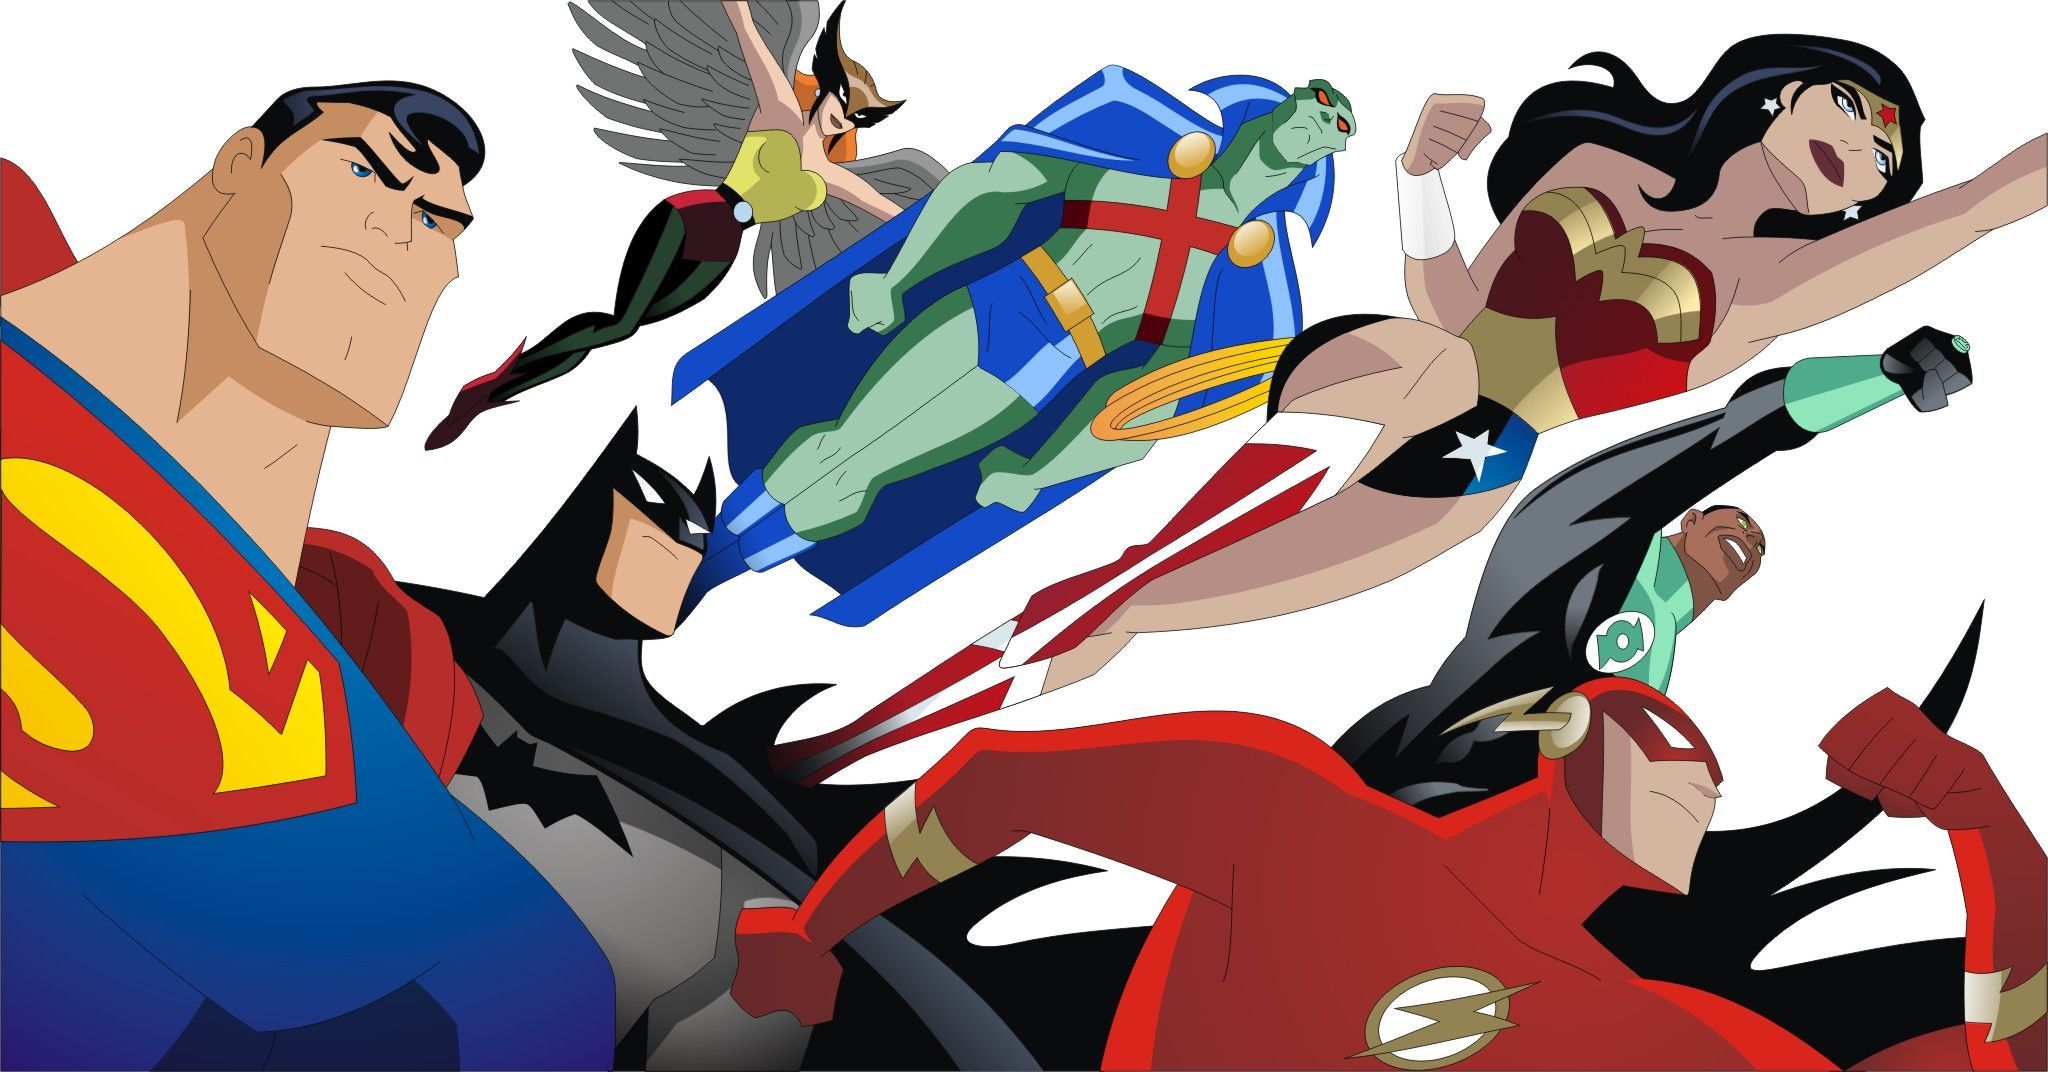 justice-league-animated-series-cartoon-network-2016